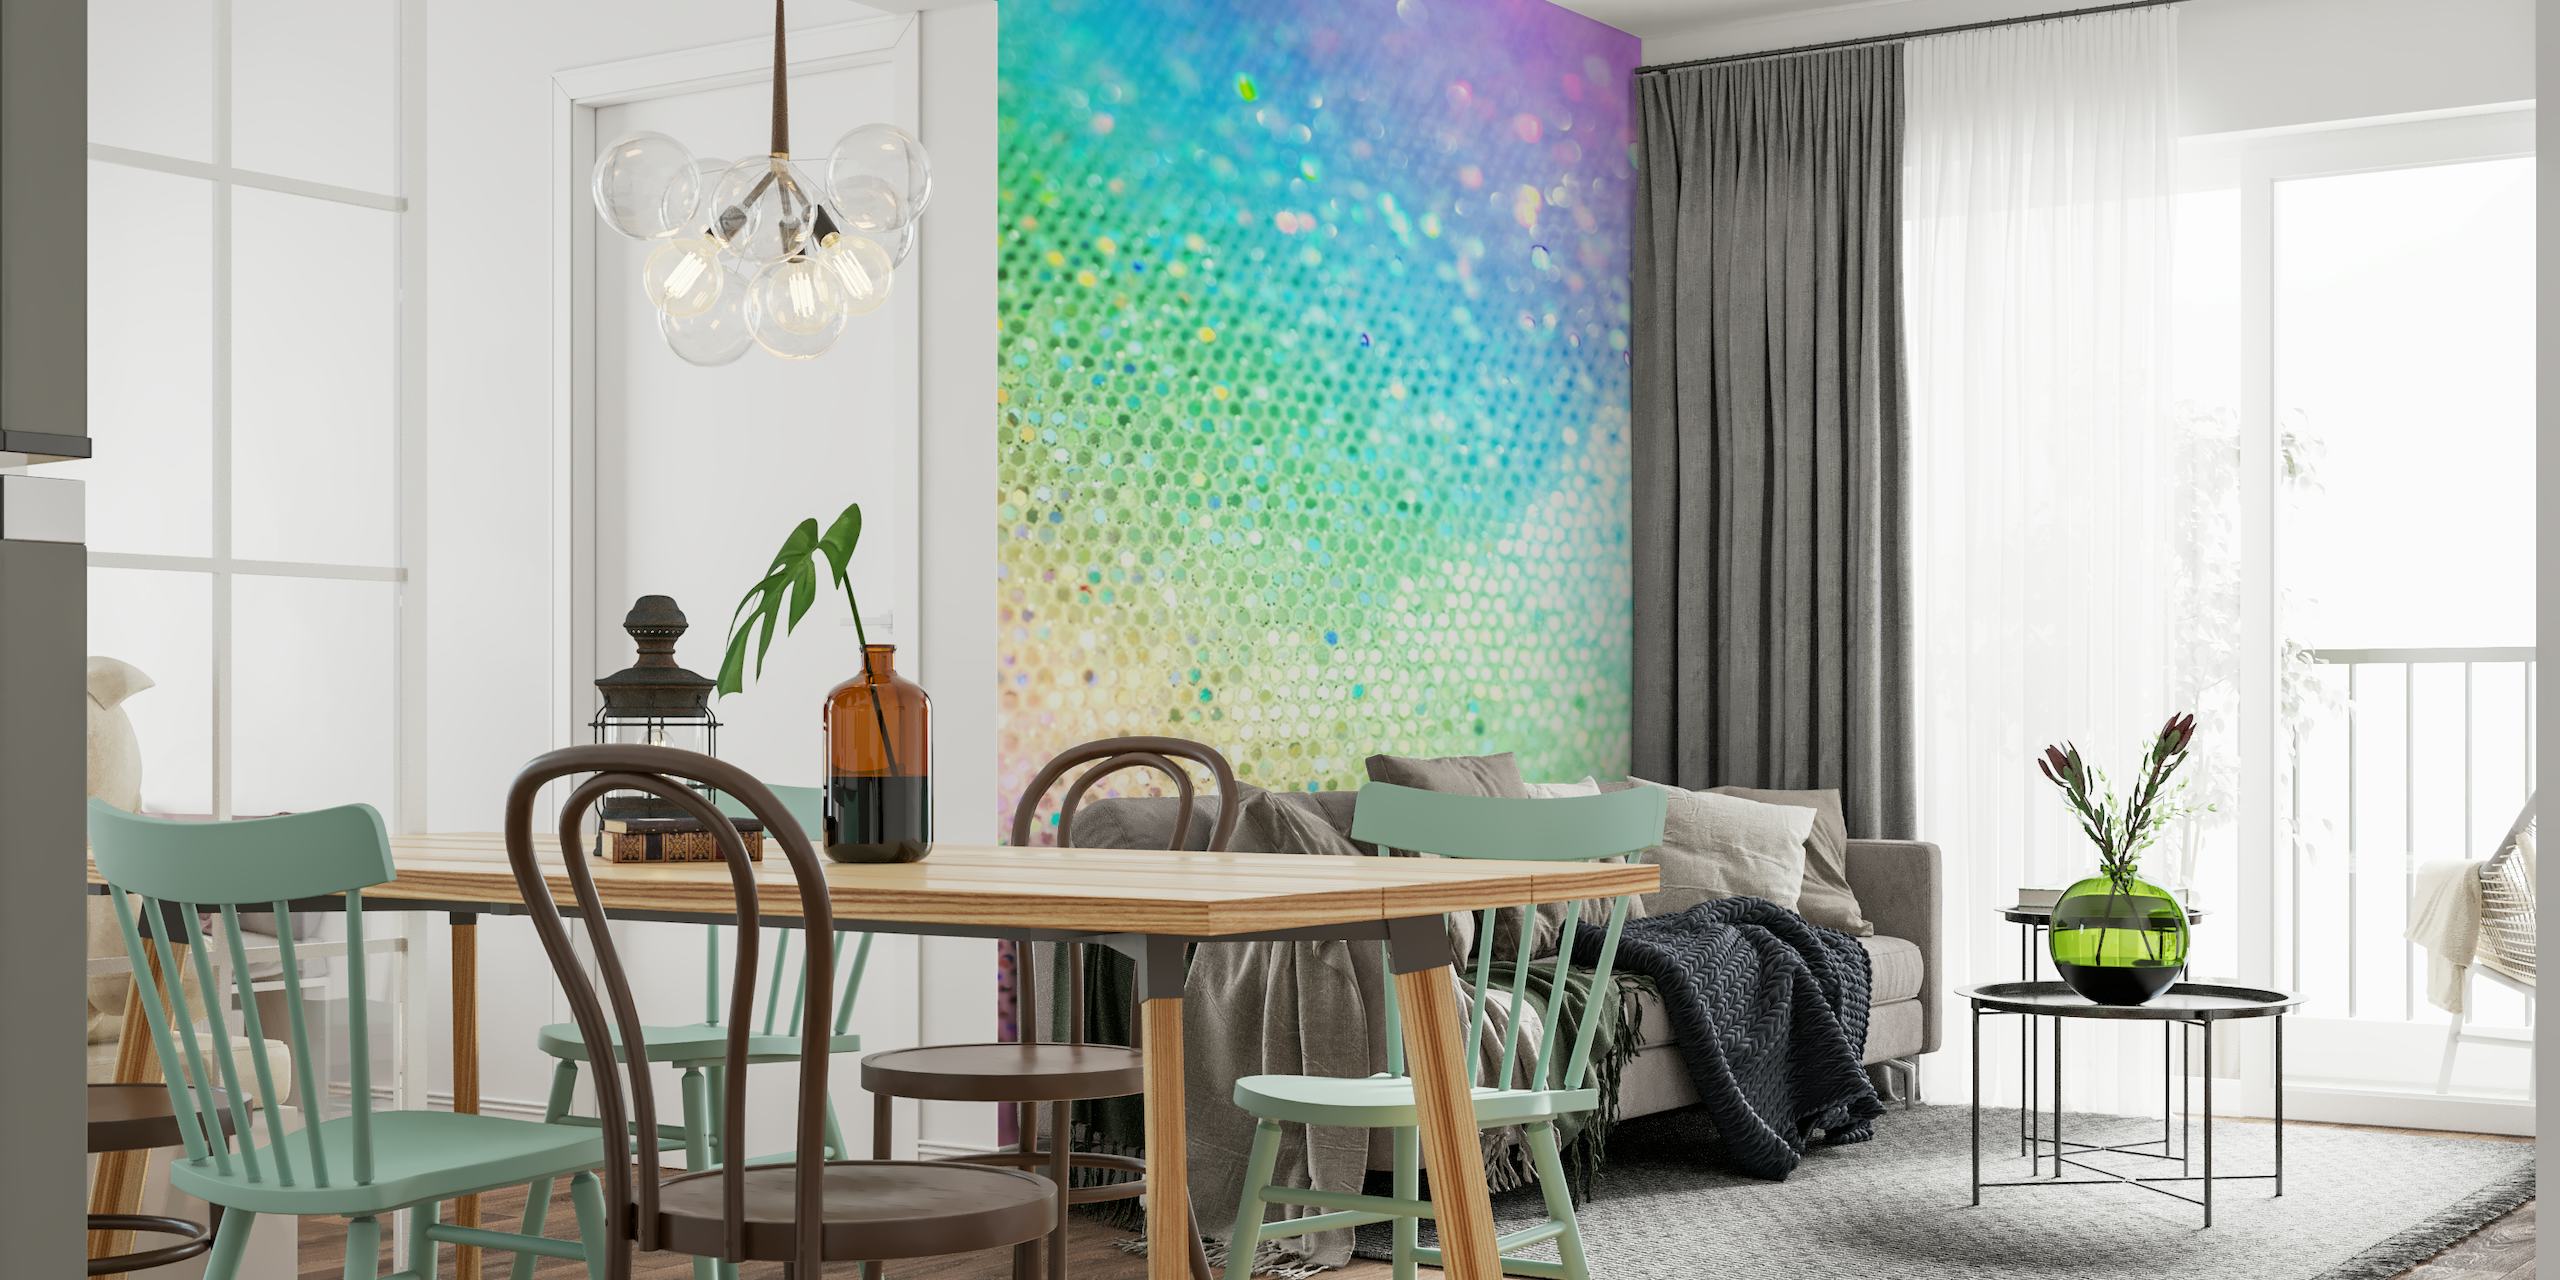 A colorful wall mural featuring a gradient of sparkling glitter dots in rainbow hues